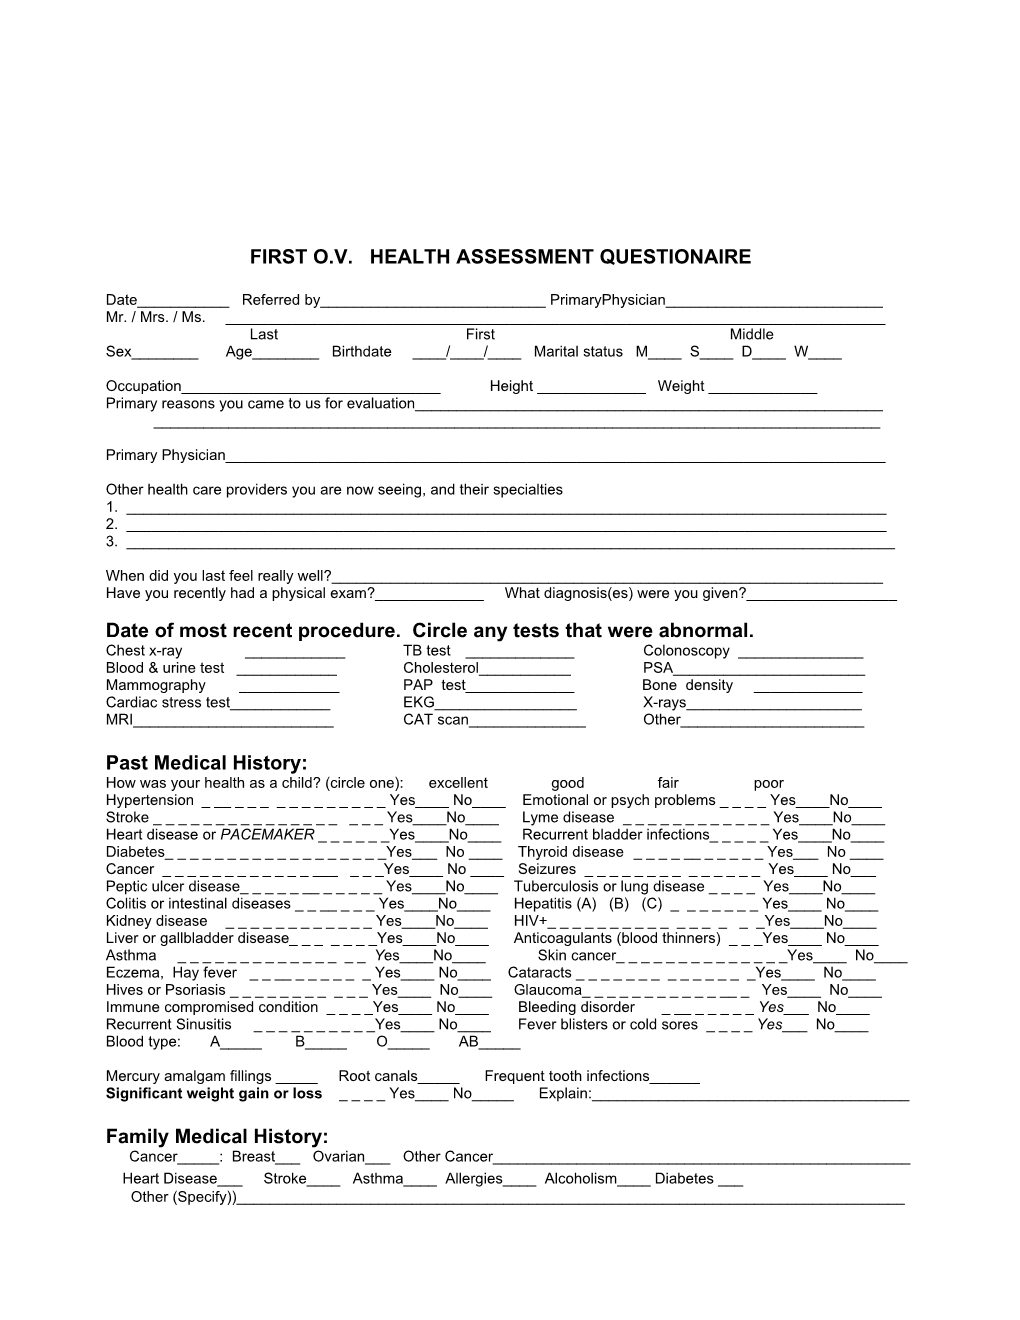 First O.V. Health Assessment Questionaire